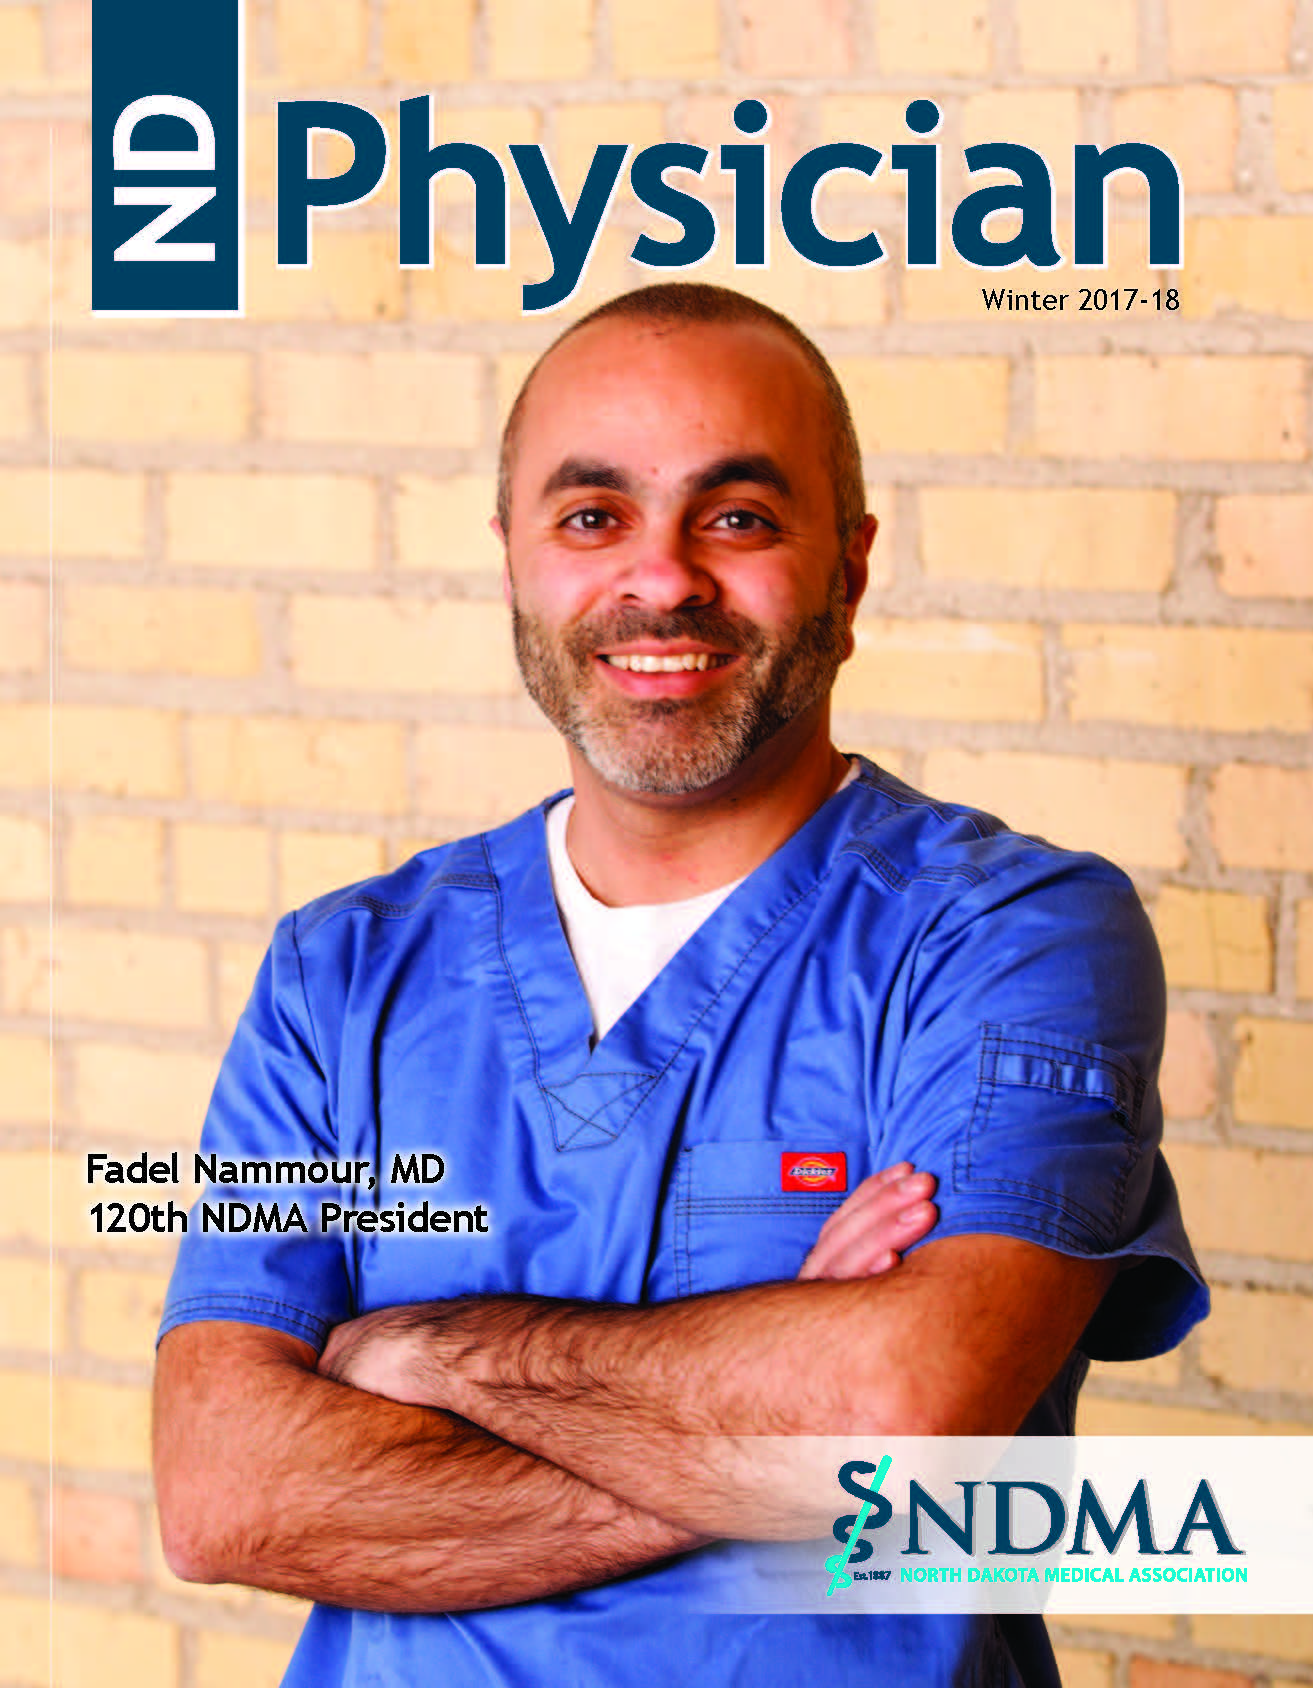 ND Physician Winter 2017-18 magazine cover